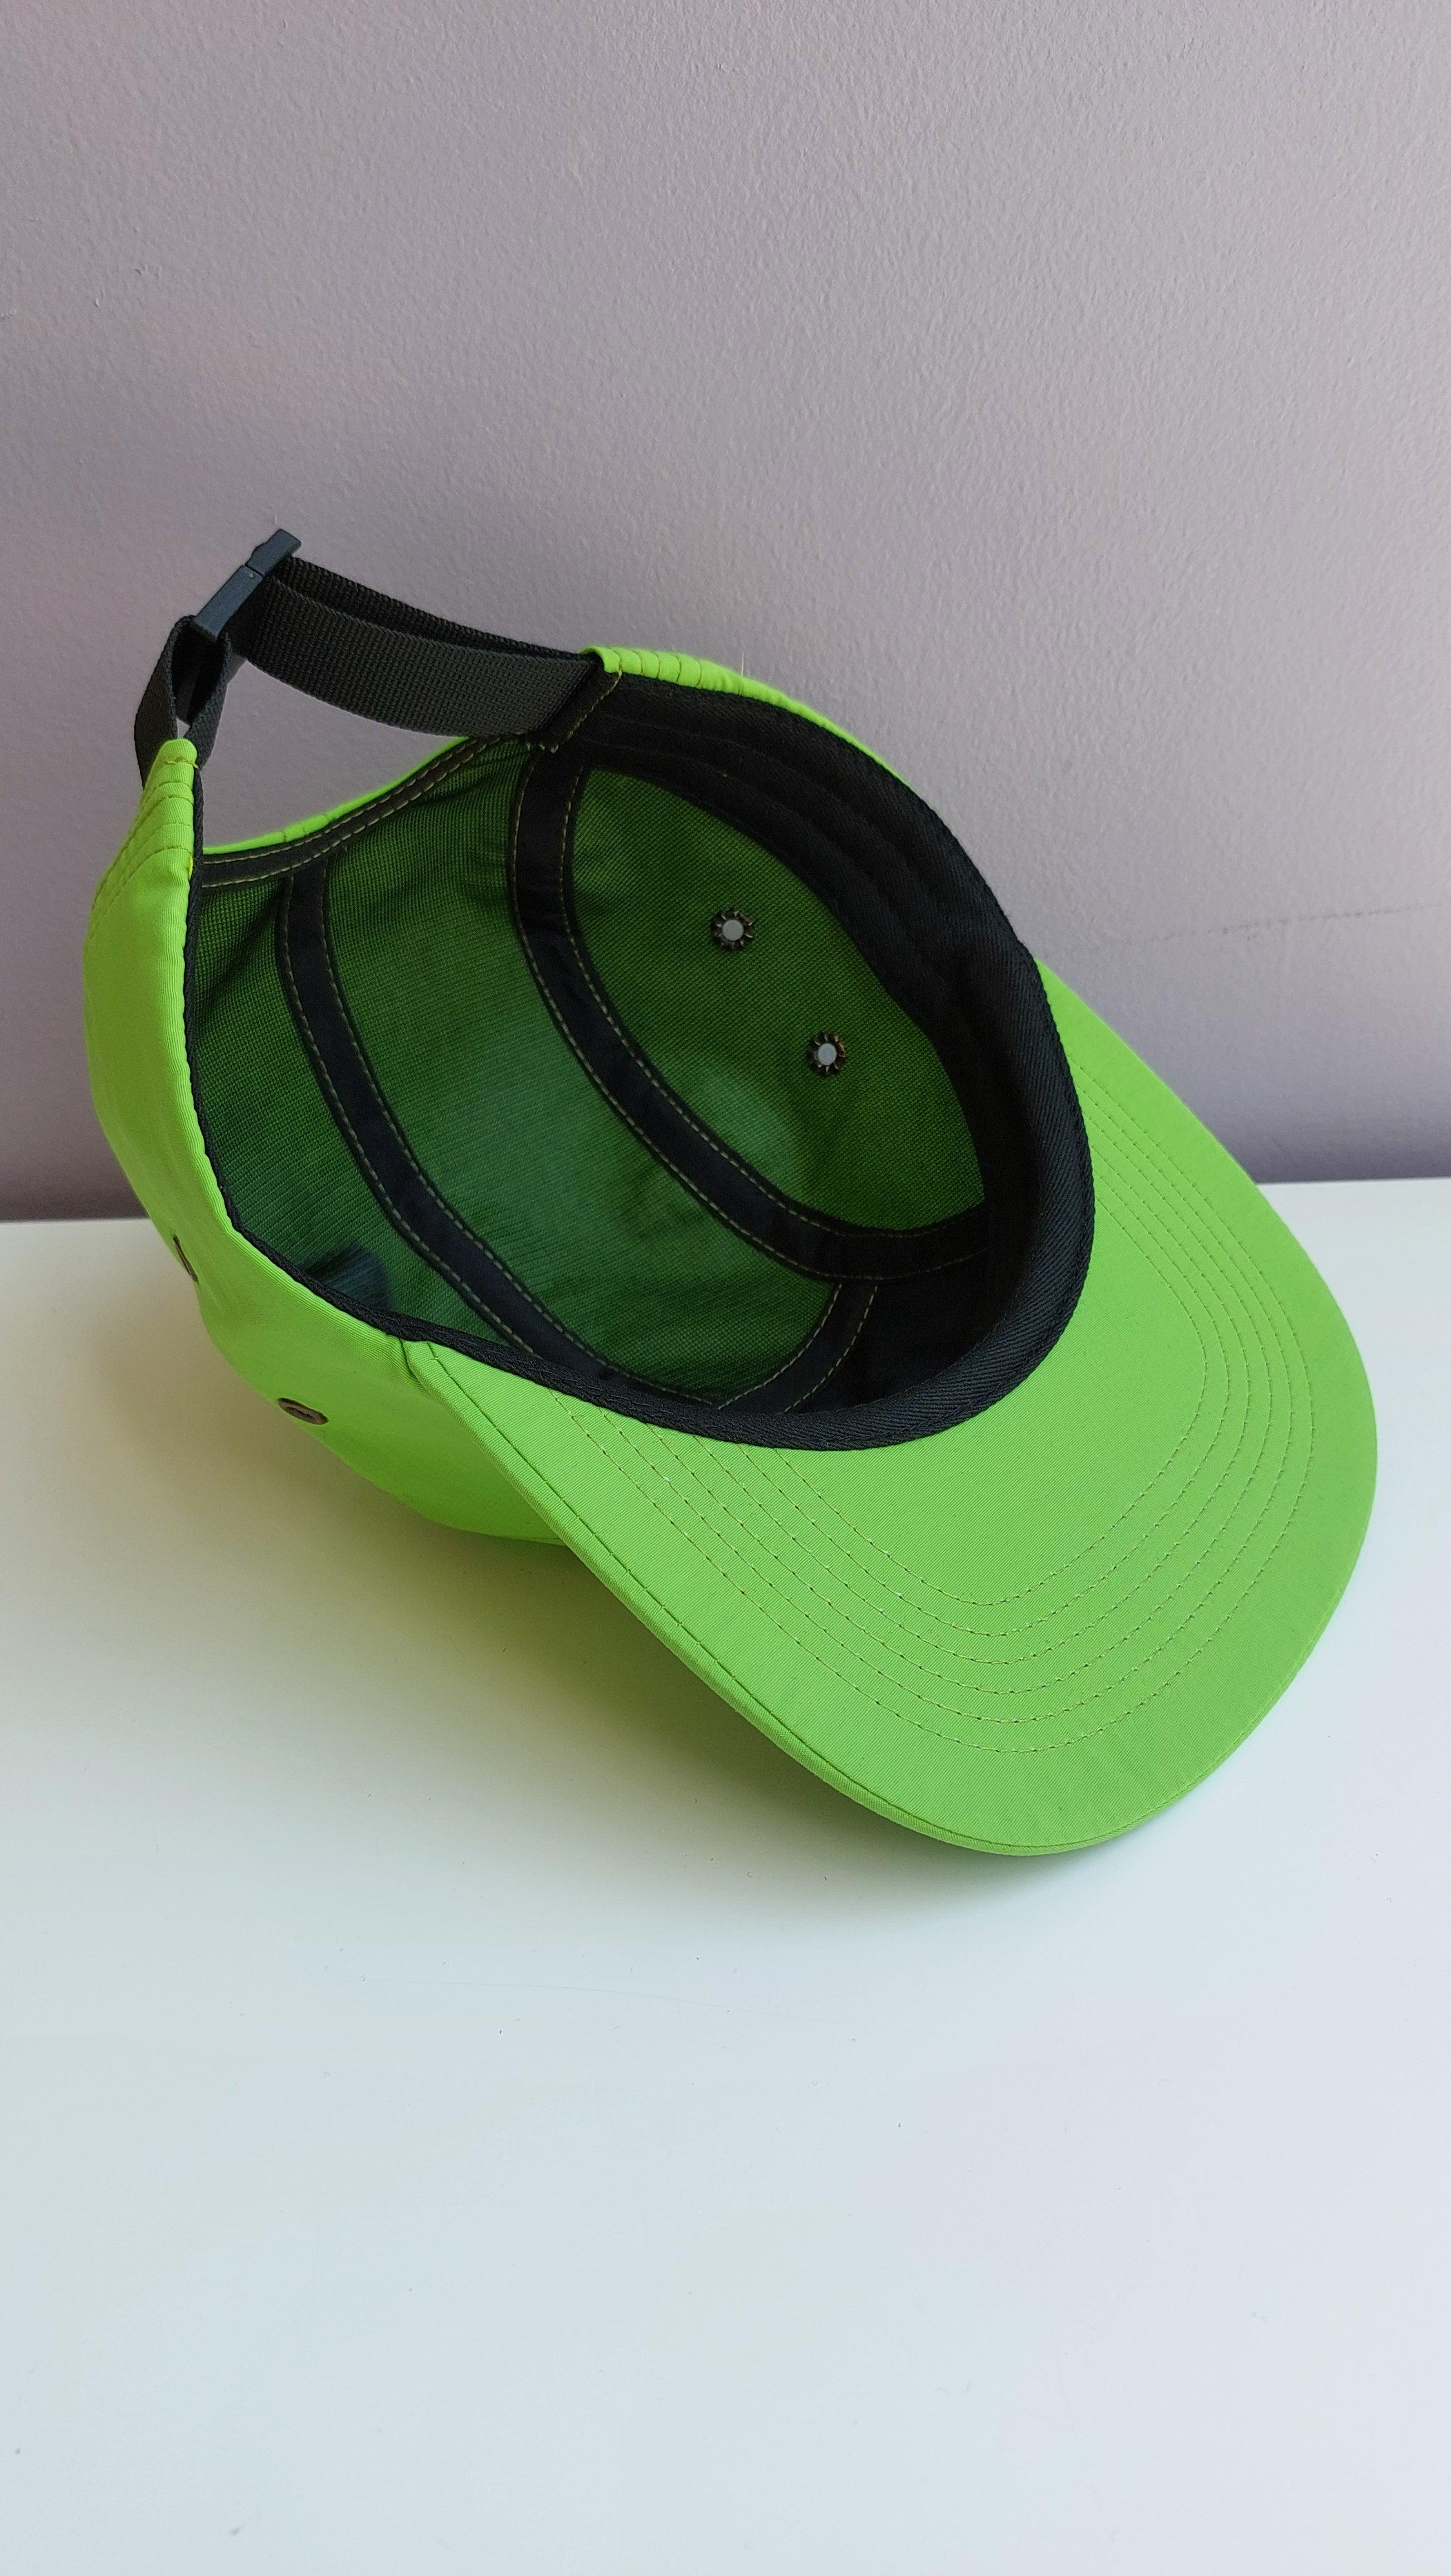 A bright green 5 panel cap with black mesh interior is upside down & turned at a 45 degree angle sitting on a white surface with a light purple background.